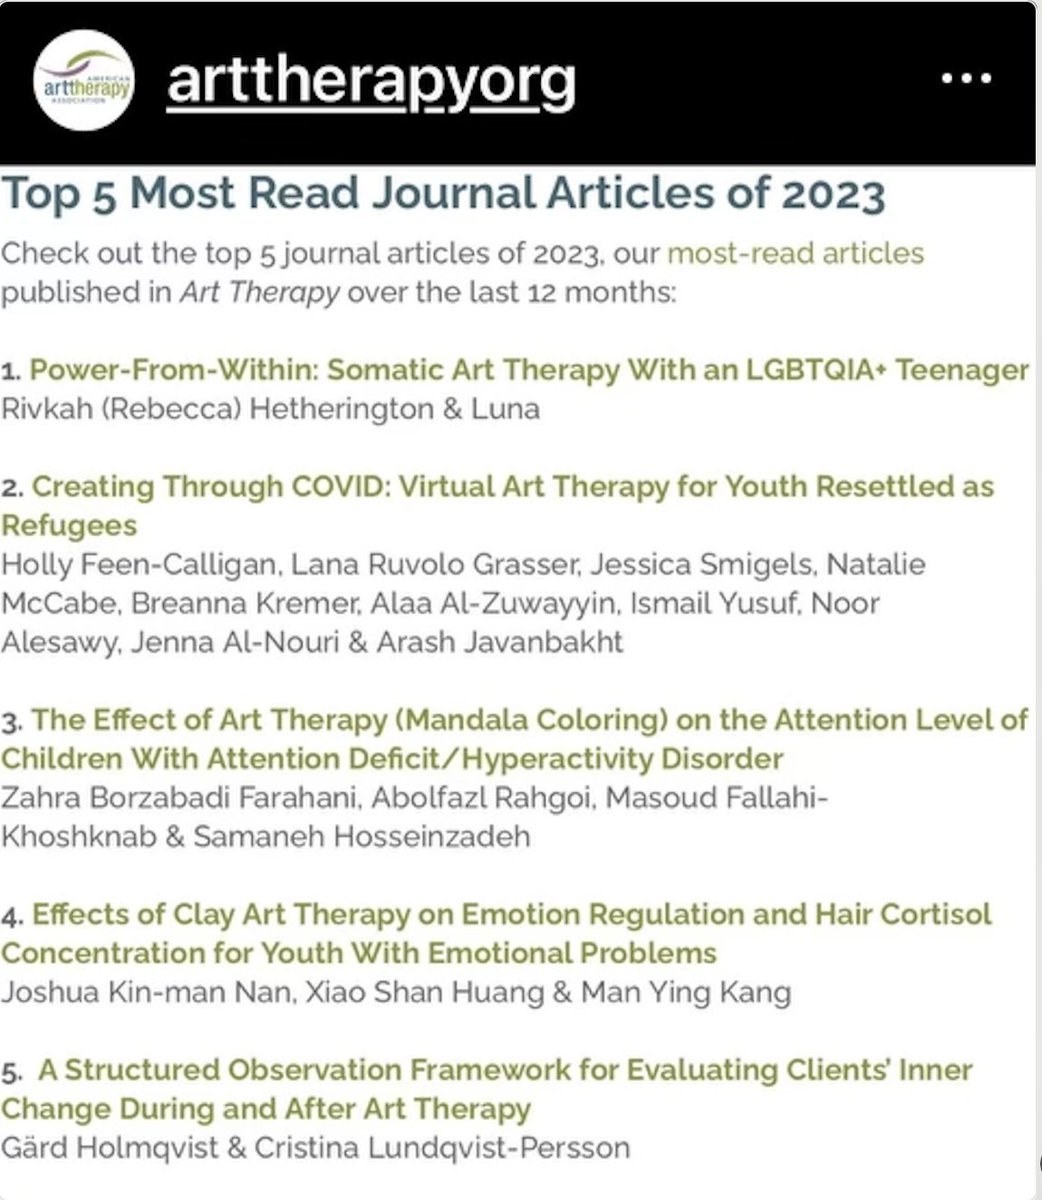 Really proud to share that our article was the second most read @ArtTherapyOrg article of 2023! Our team @waynemedicine and @waynestatecoe is so passionate about bringing art therapy to communities in need through partnerships w/ orgs like @IamSamaritas ✨ tinyurl.com/3b6rvu4f